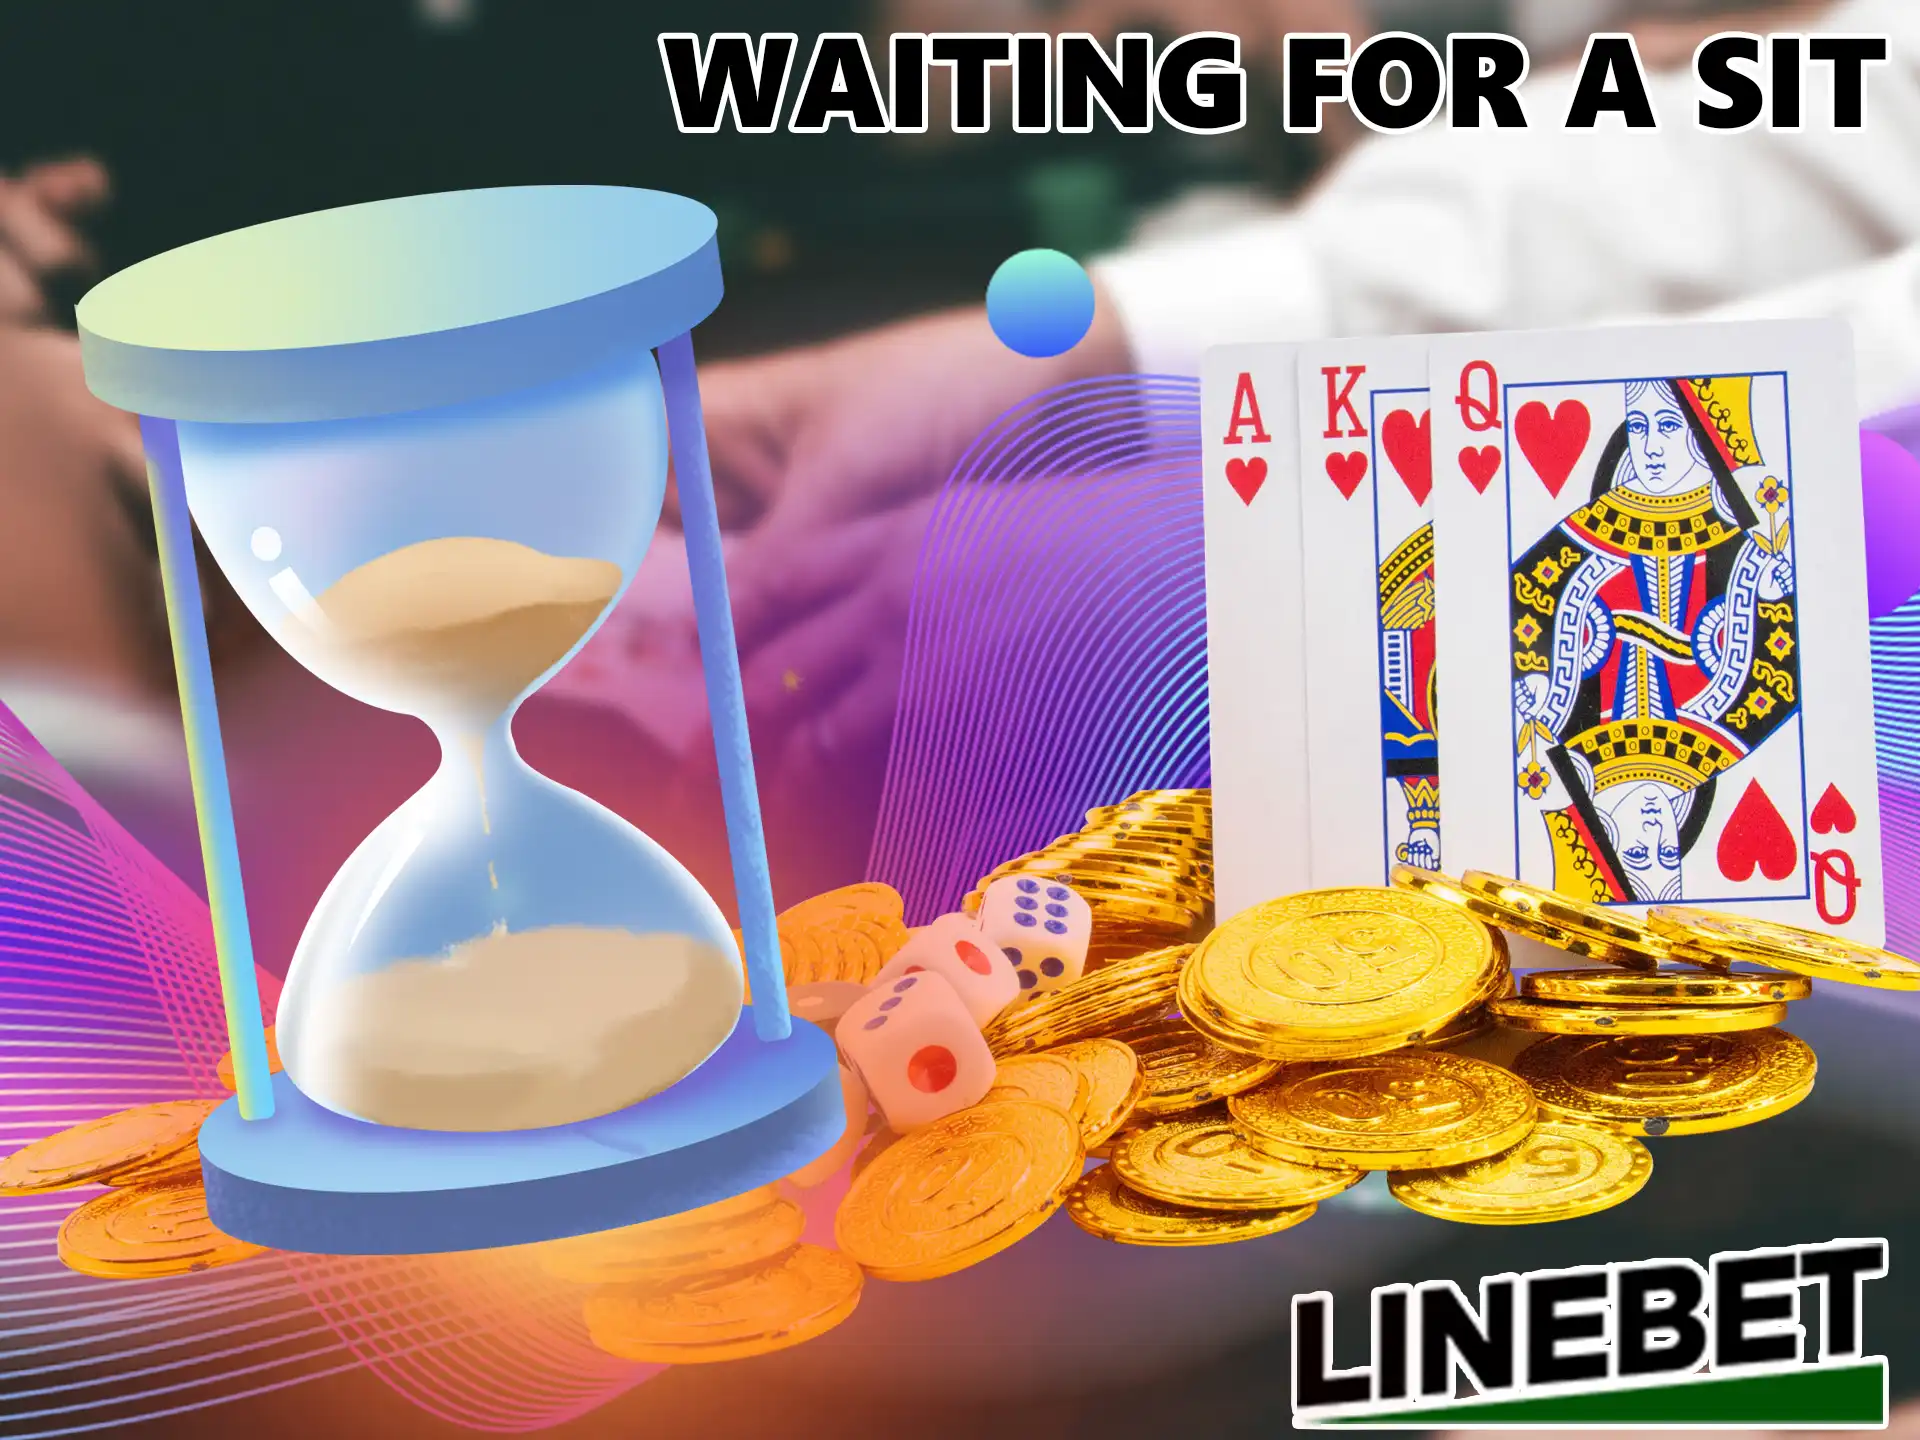 The number of seats at the table is unfortunately limited at Linebet Live Casino, so you have to wait until there is a free seat available, or simply start another free game.